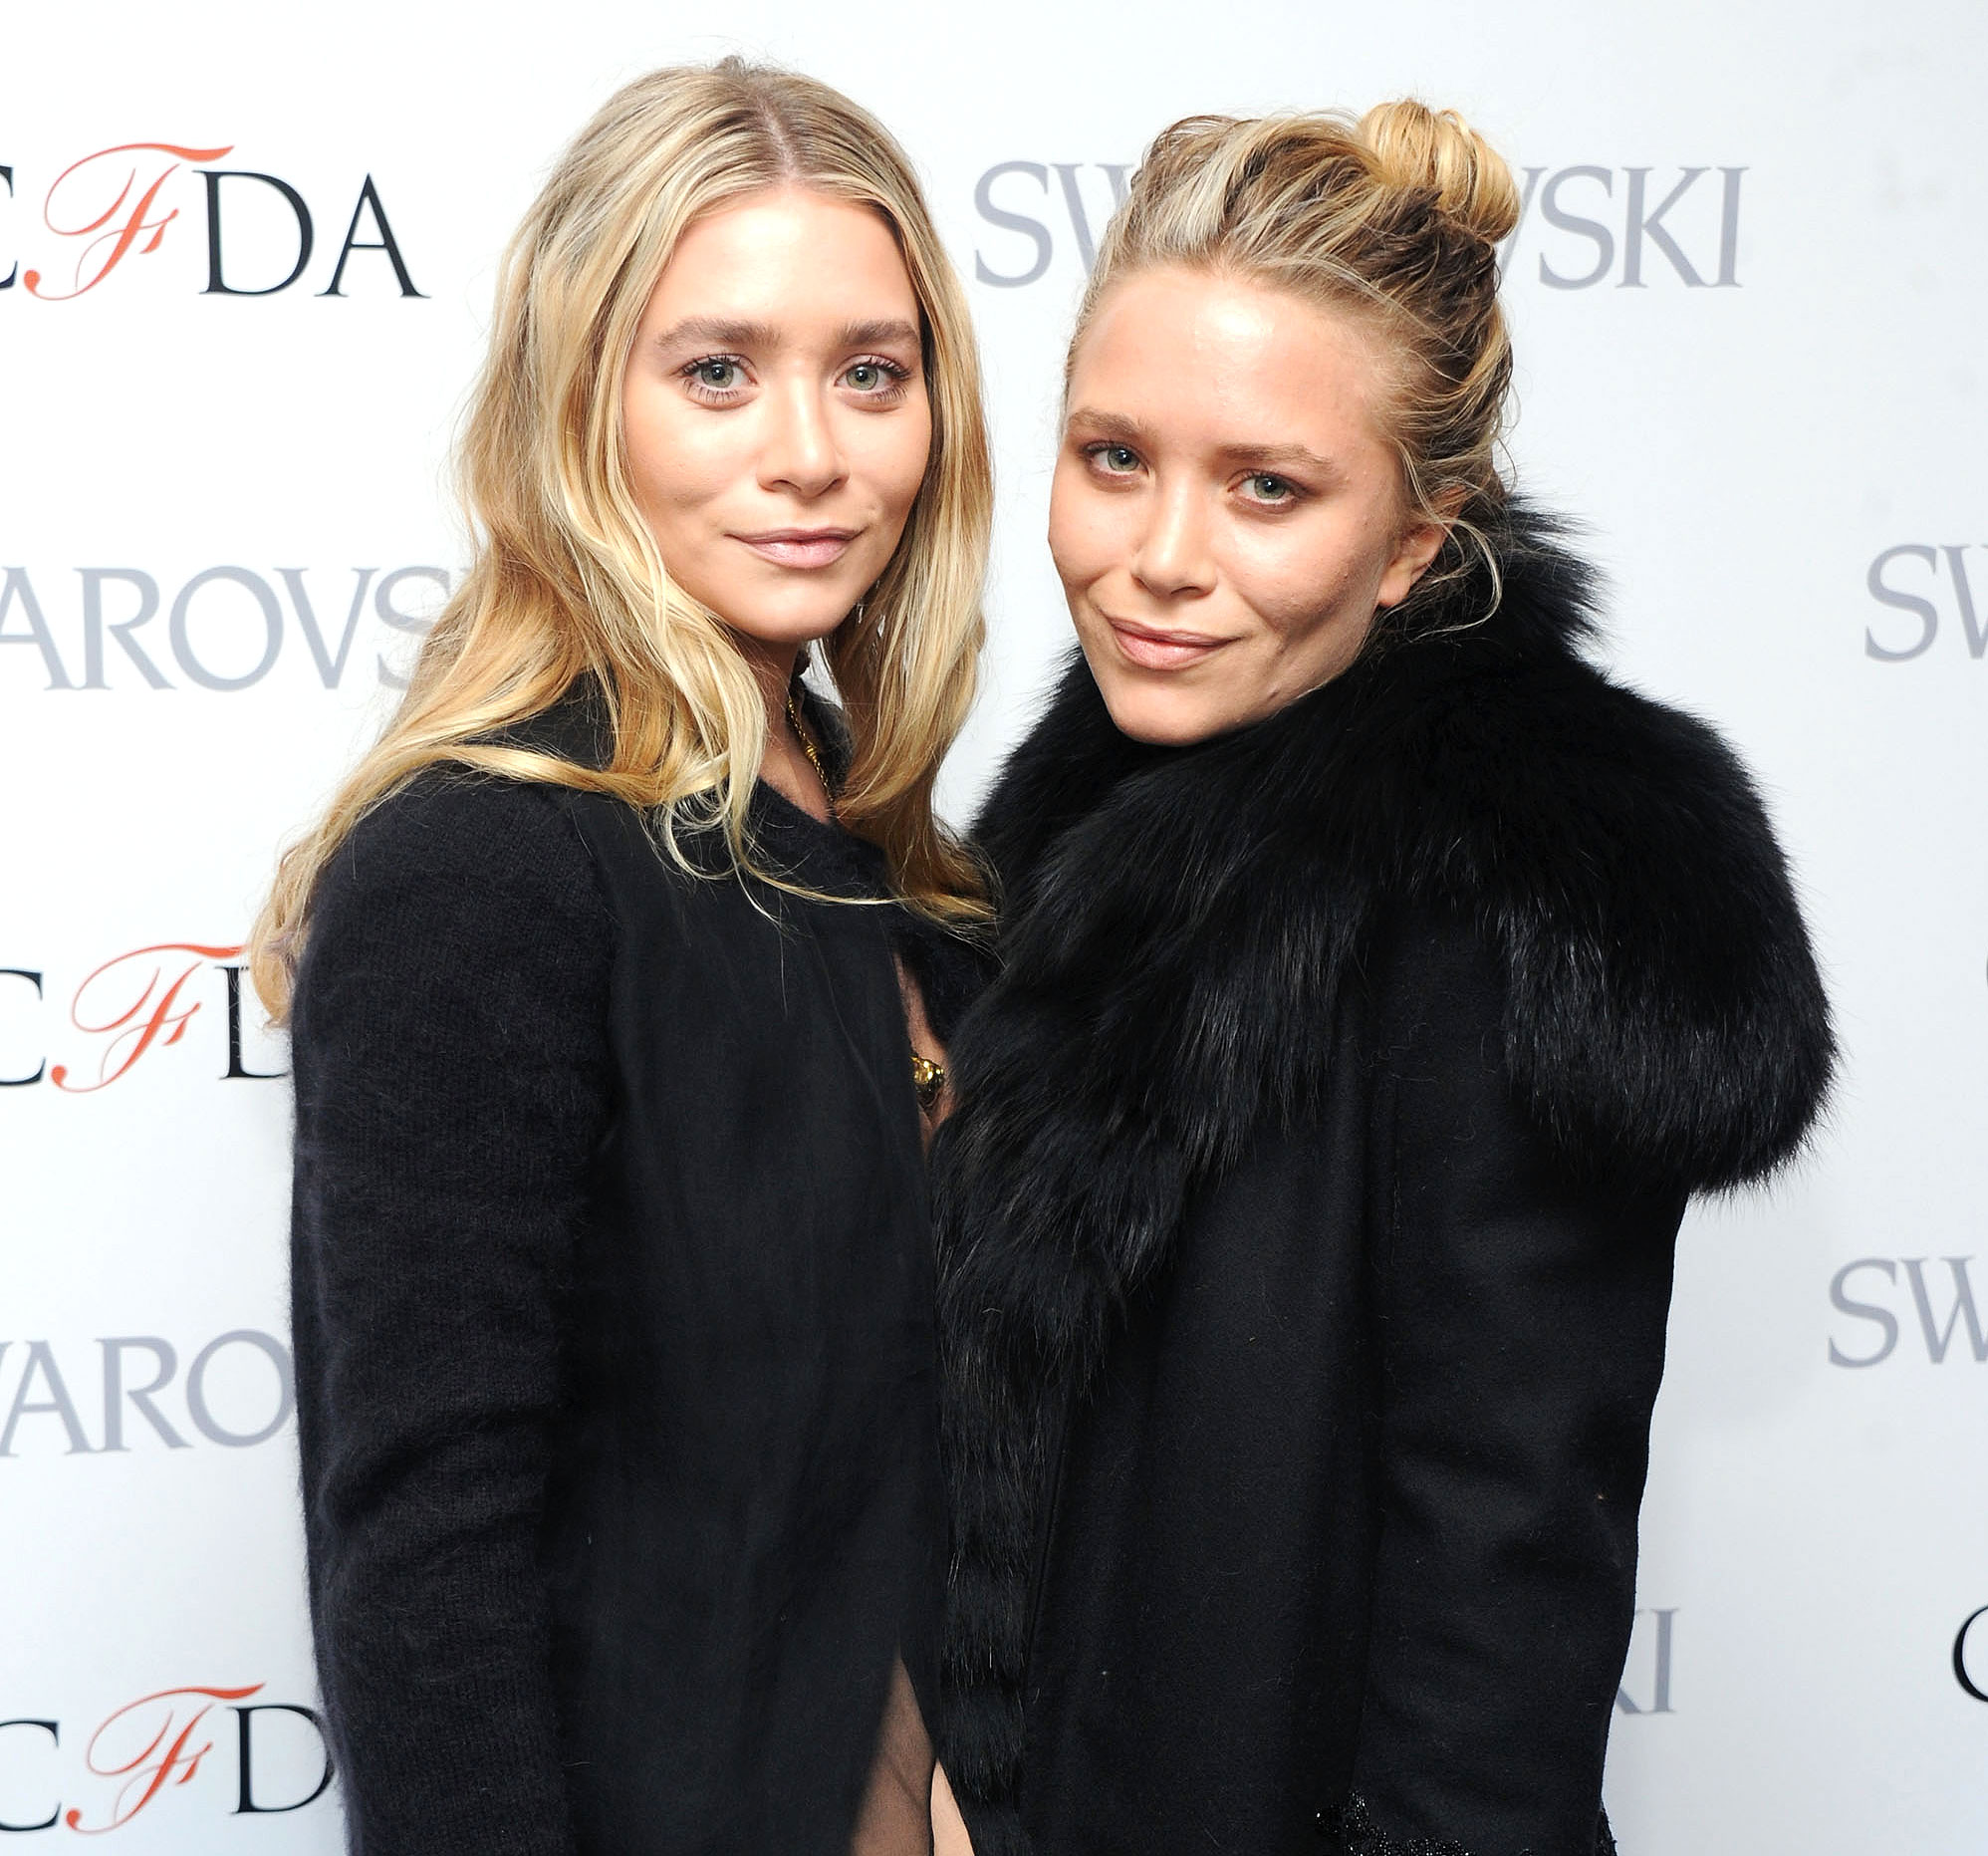 The Row: the rise of the Olsen twins' luxury brand